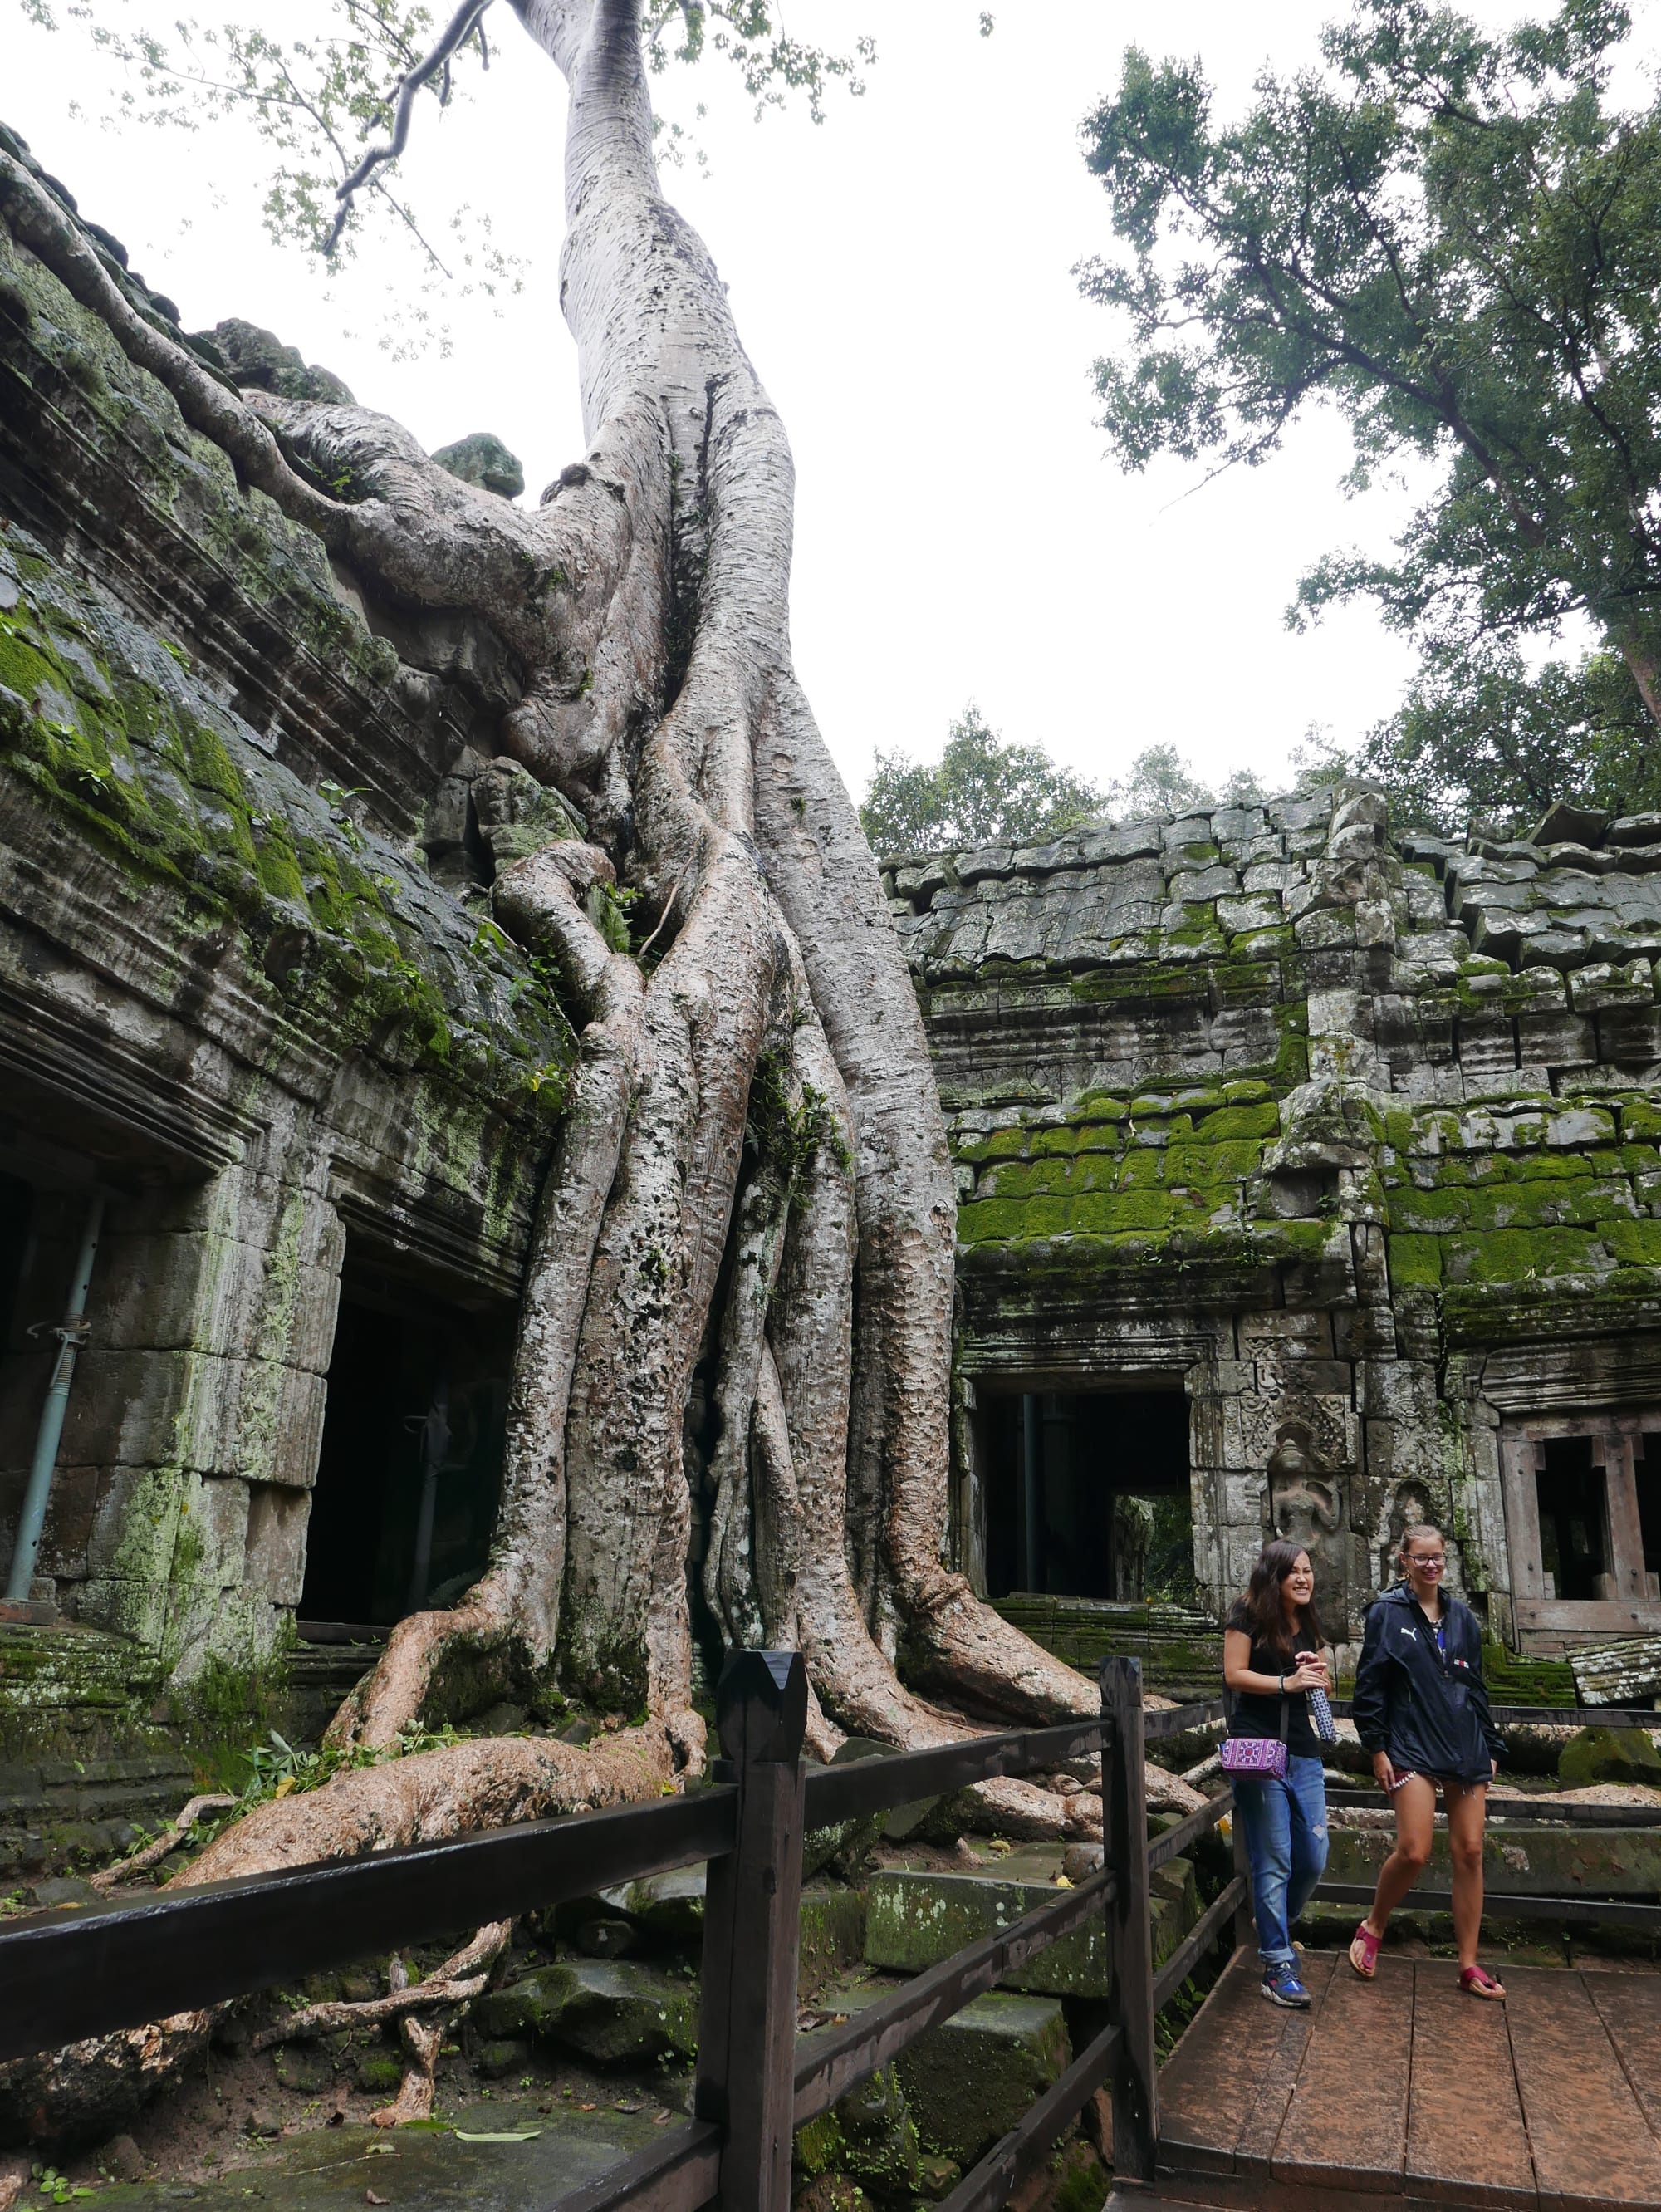 Photo by Author — a tree growing over the temple — Ta Prohm (ប្រាសាទតាព្រហ្ម), Angkor Archaeological Park, Angkor, Cambodia